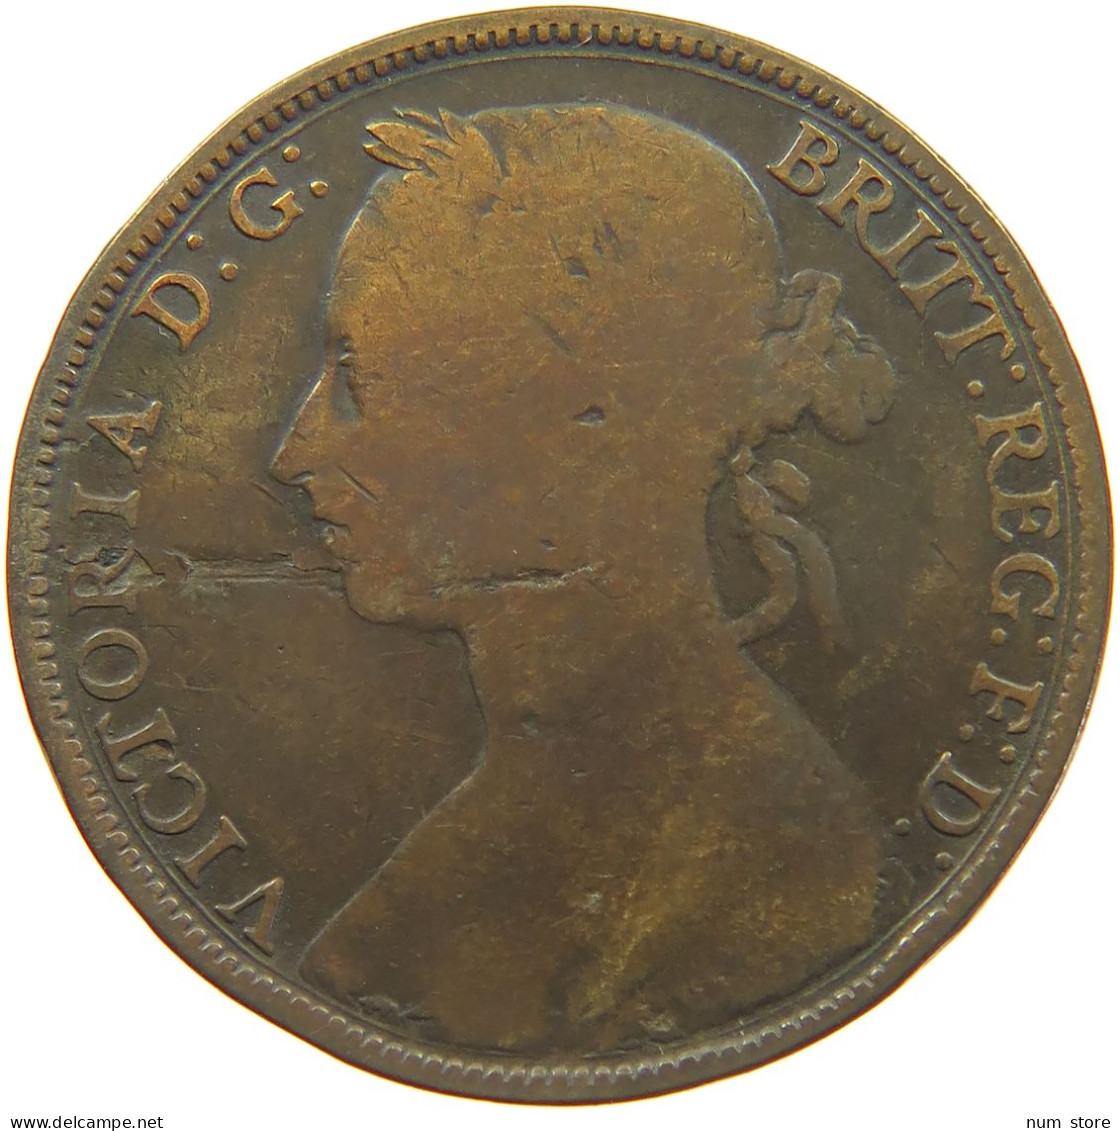 GREAT BRITAIN PENNY 1882 H Victoria 1837-1901 #c015 0223 - D. 1 Penny